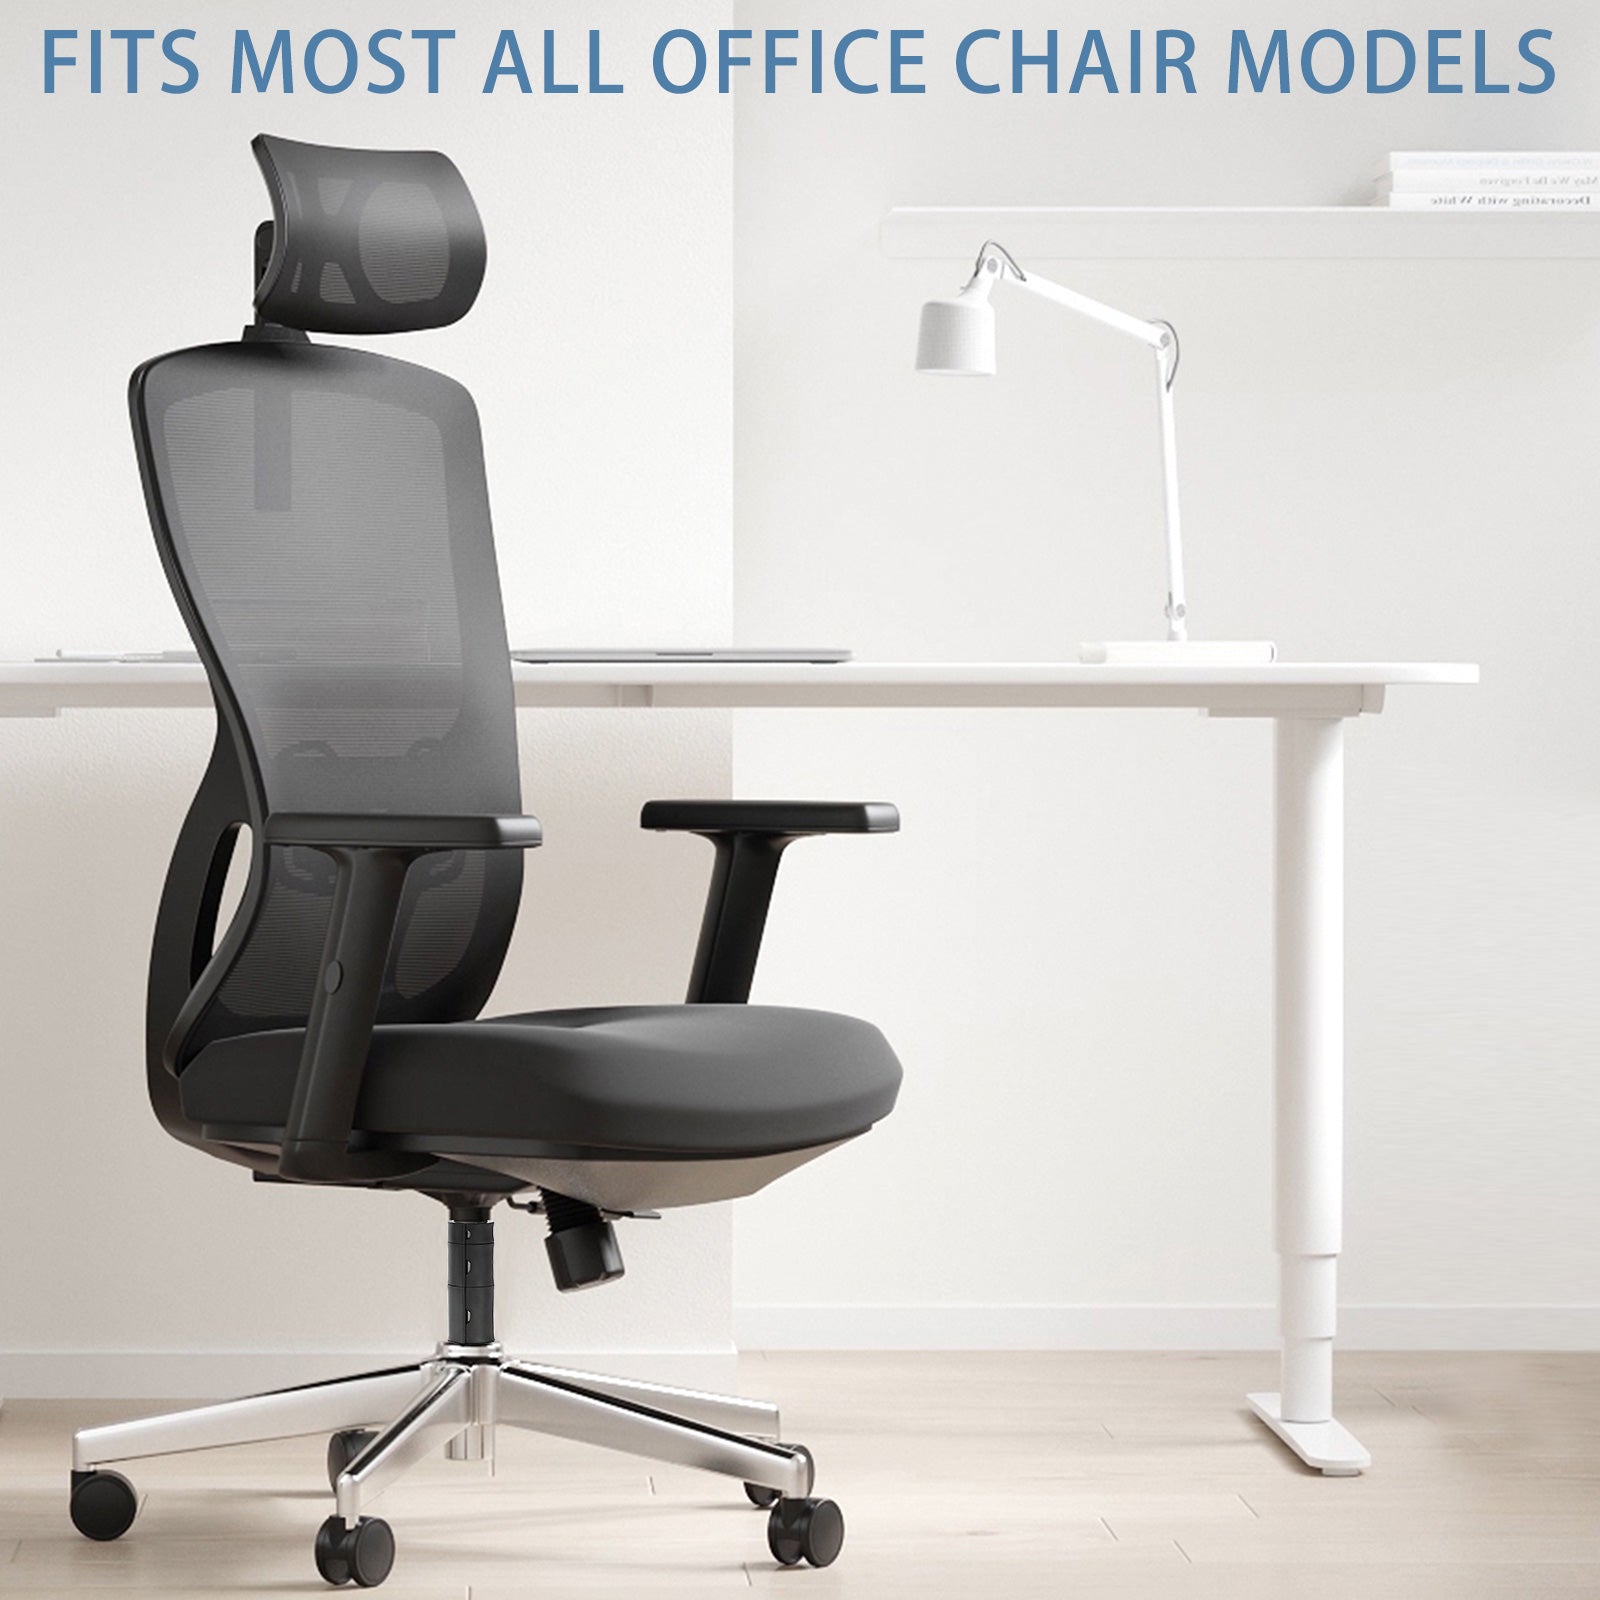  Office Chair Buddy - Fix Your Sinking Office Chair in